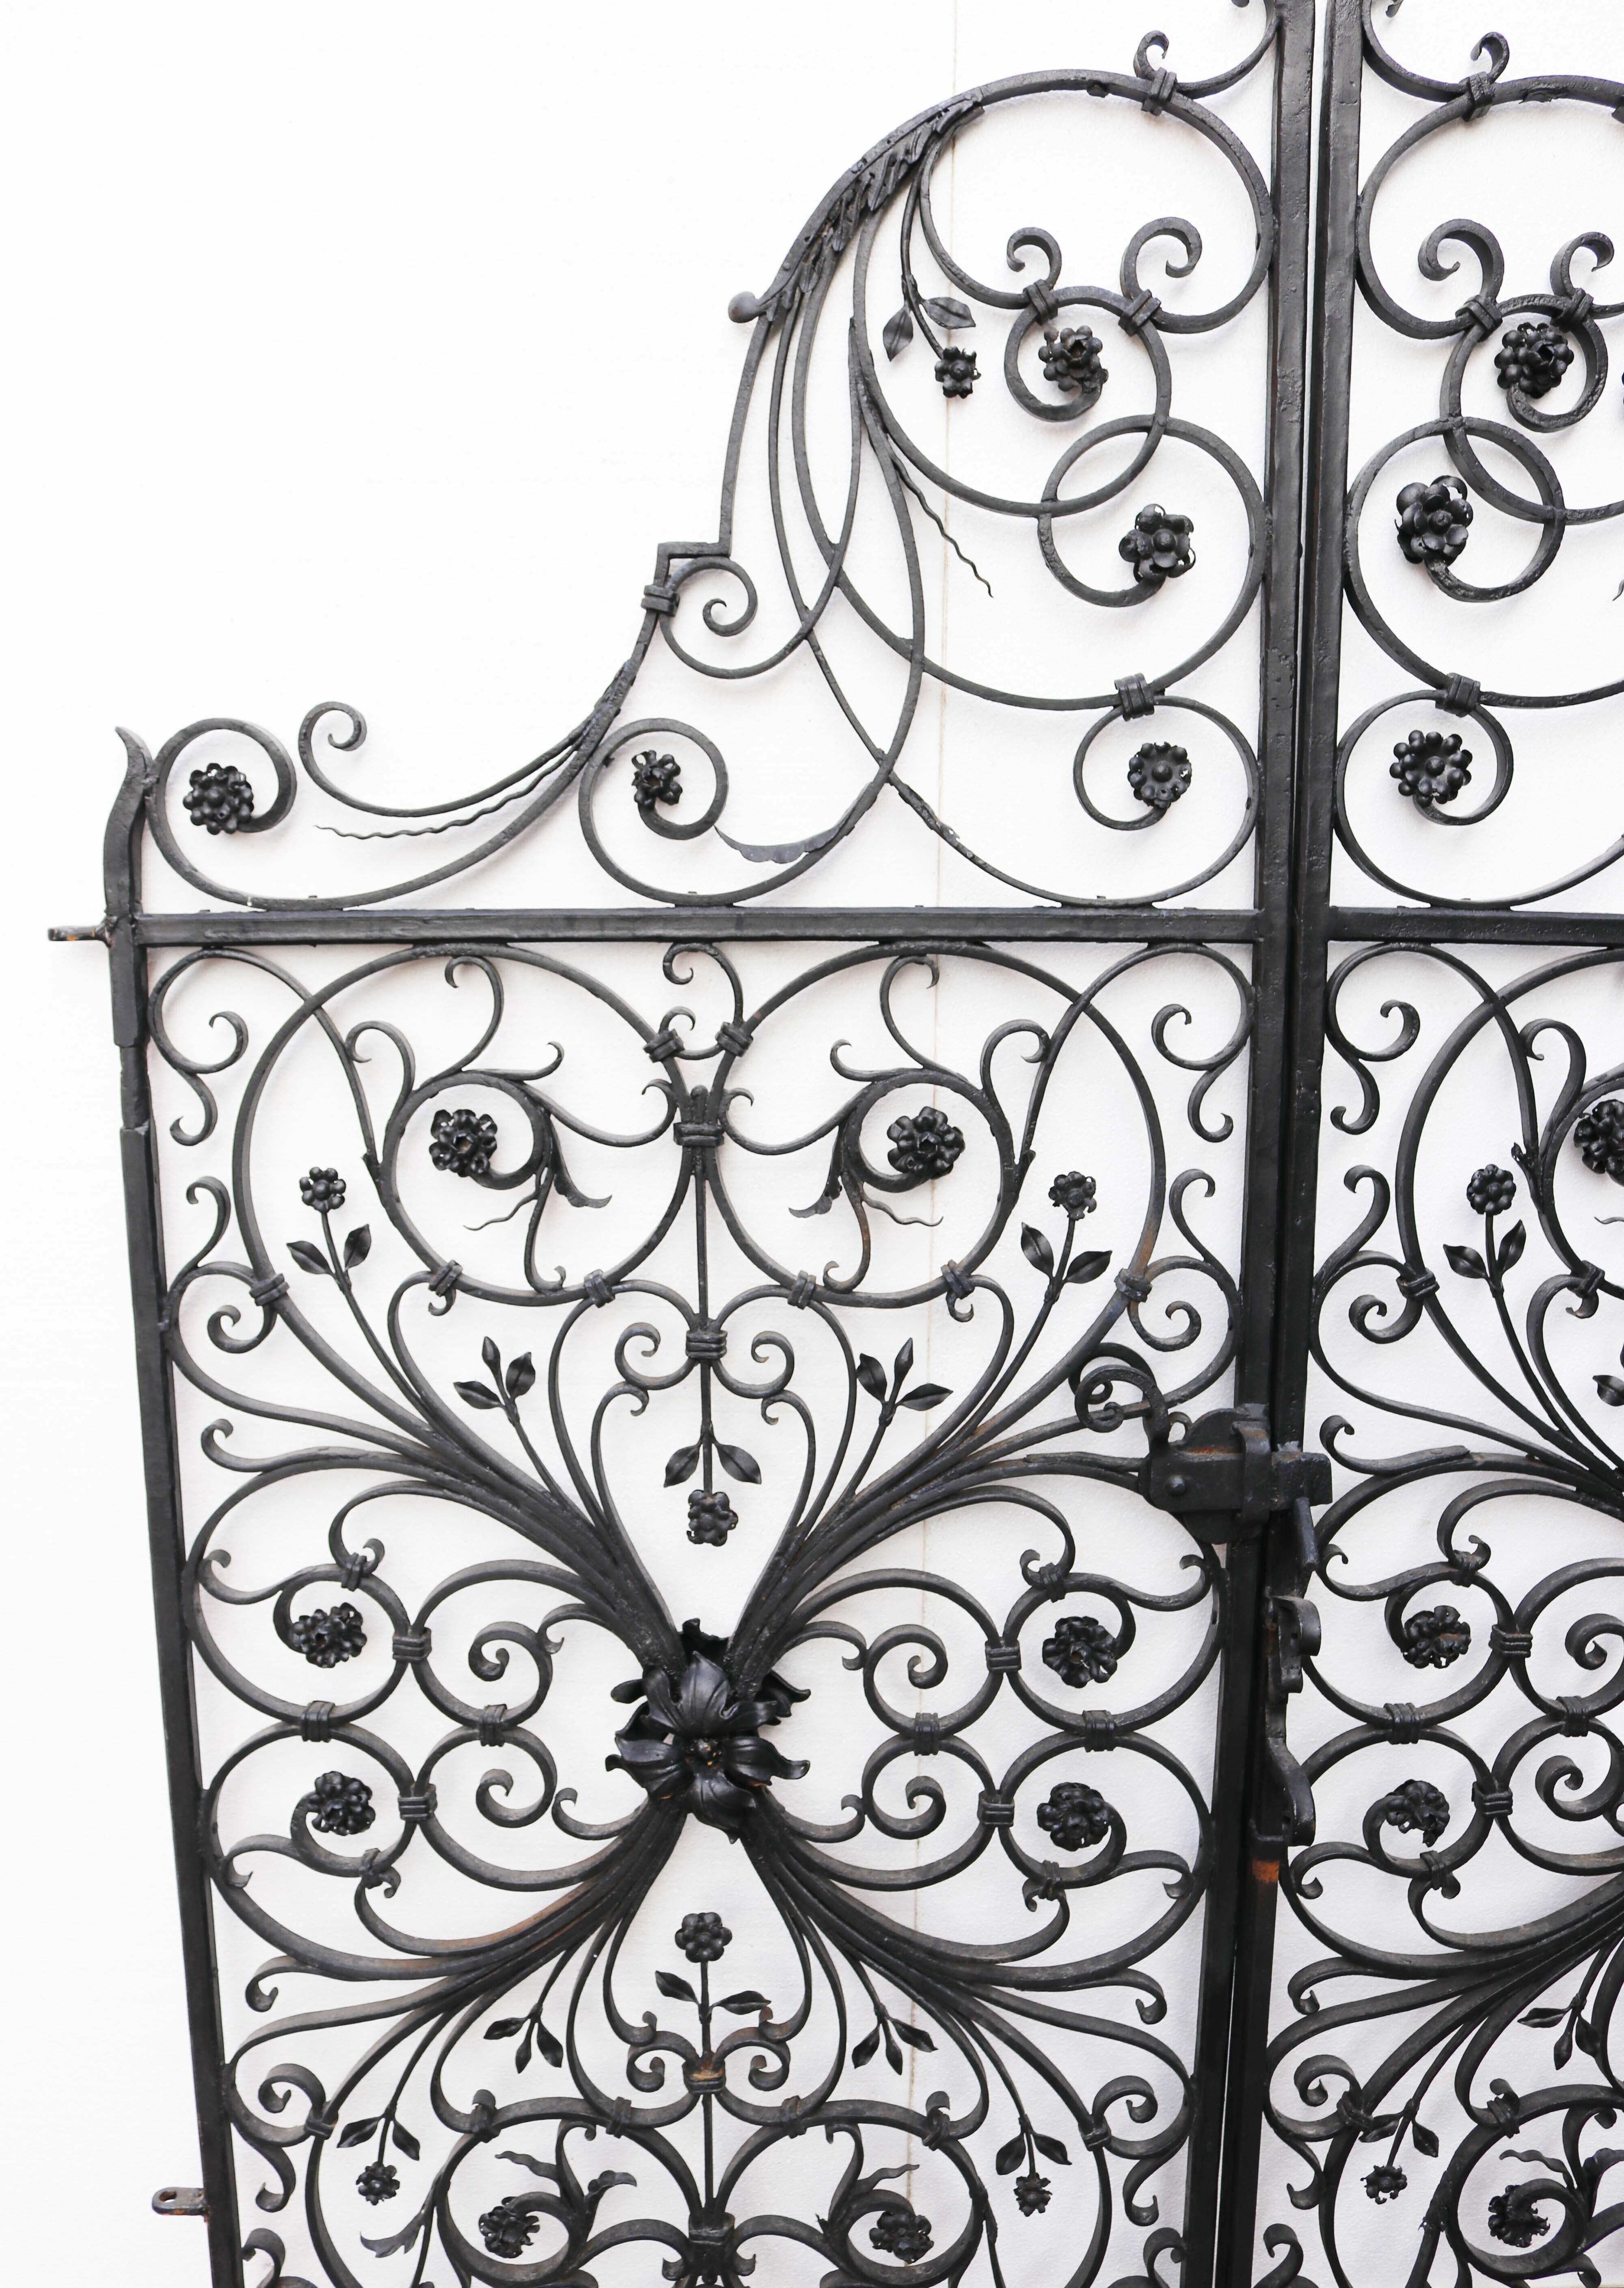 Pair of Victorian style garden gates. An impressive set of gates featuring a floral design. The gates resemble an Arts and Crafts style and were produced circa 1920.



Additional Dimensions

For an opening of approx. 174 cm.